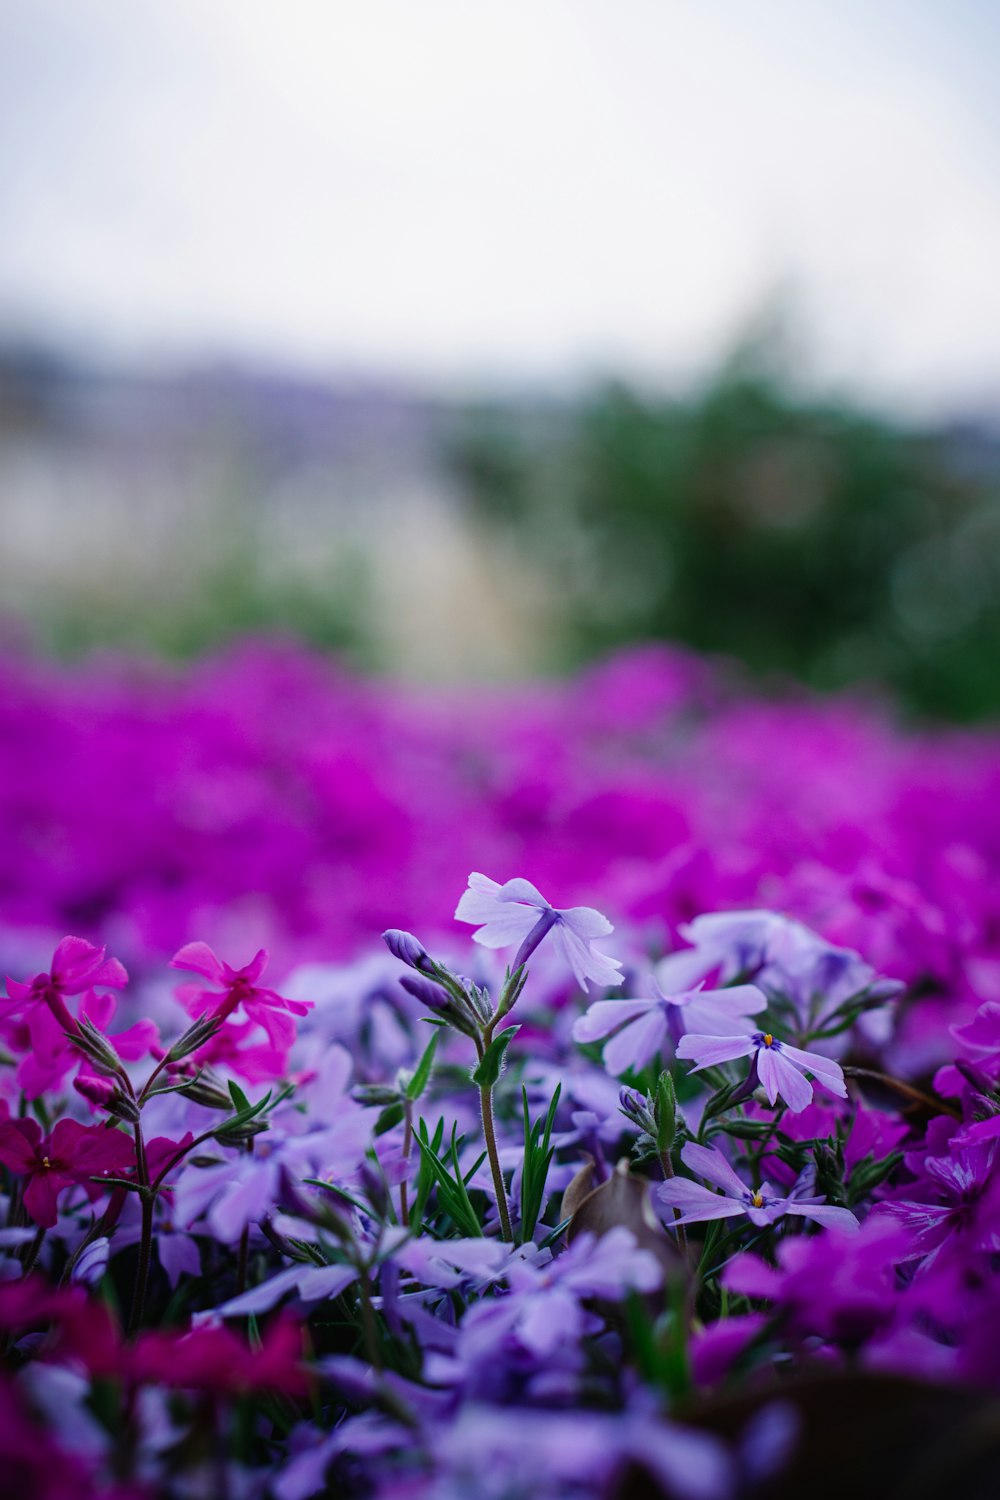 a field of purple flowers with a sky background